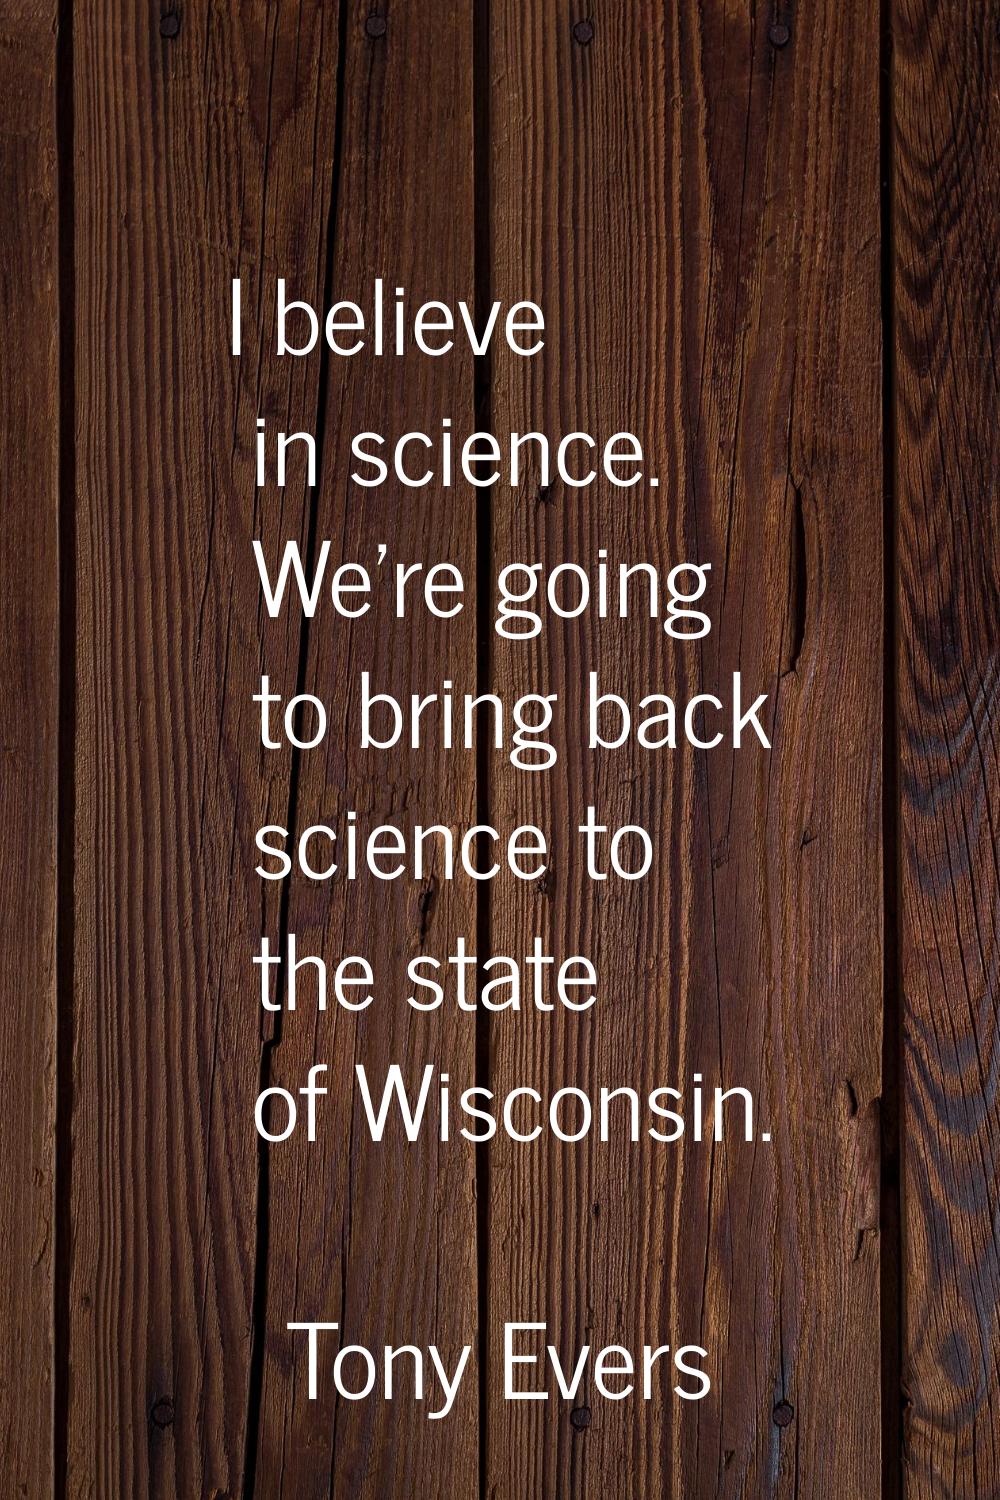 I believe in science. We're going to bring back science to the state of Wisconsin.